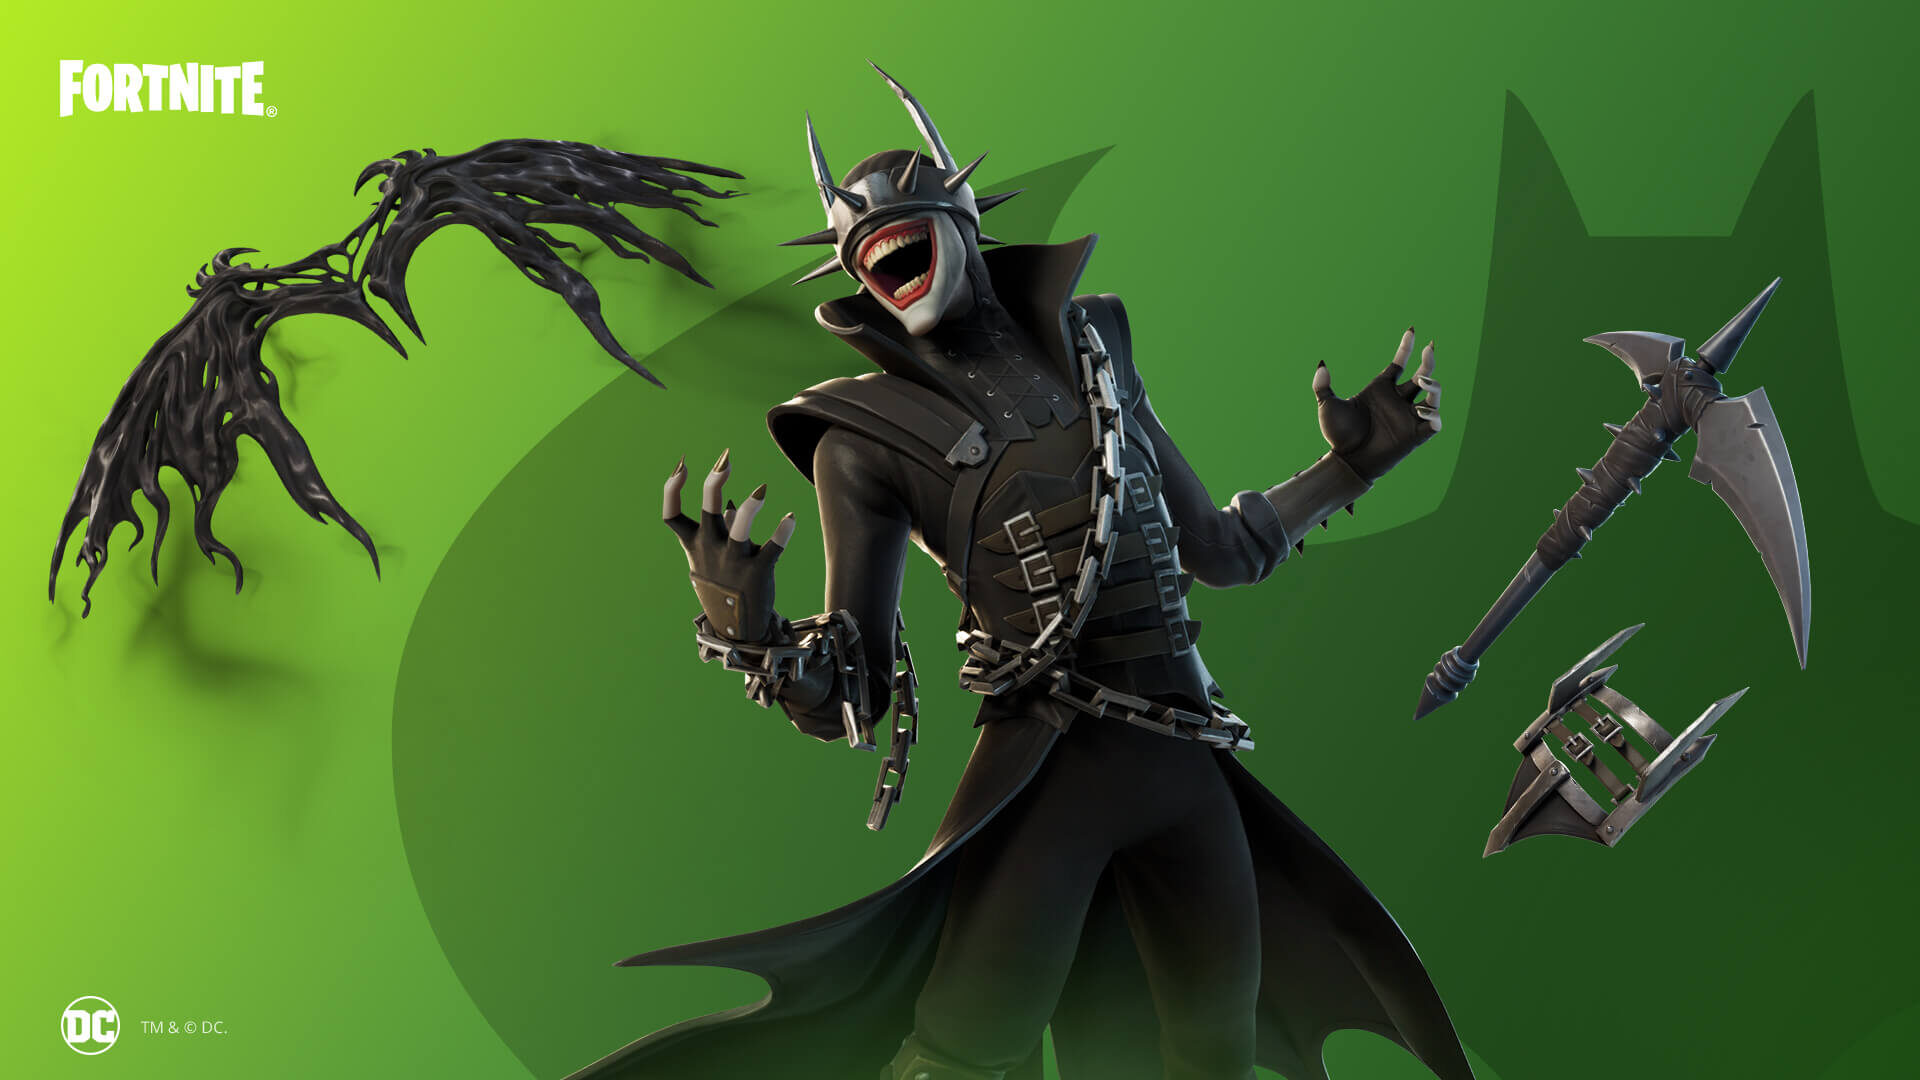 Fortnite - The Batman Who Laughs Outfit (DLC) Epic Games - PC - PentaKill  Store - Gift Card e Games